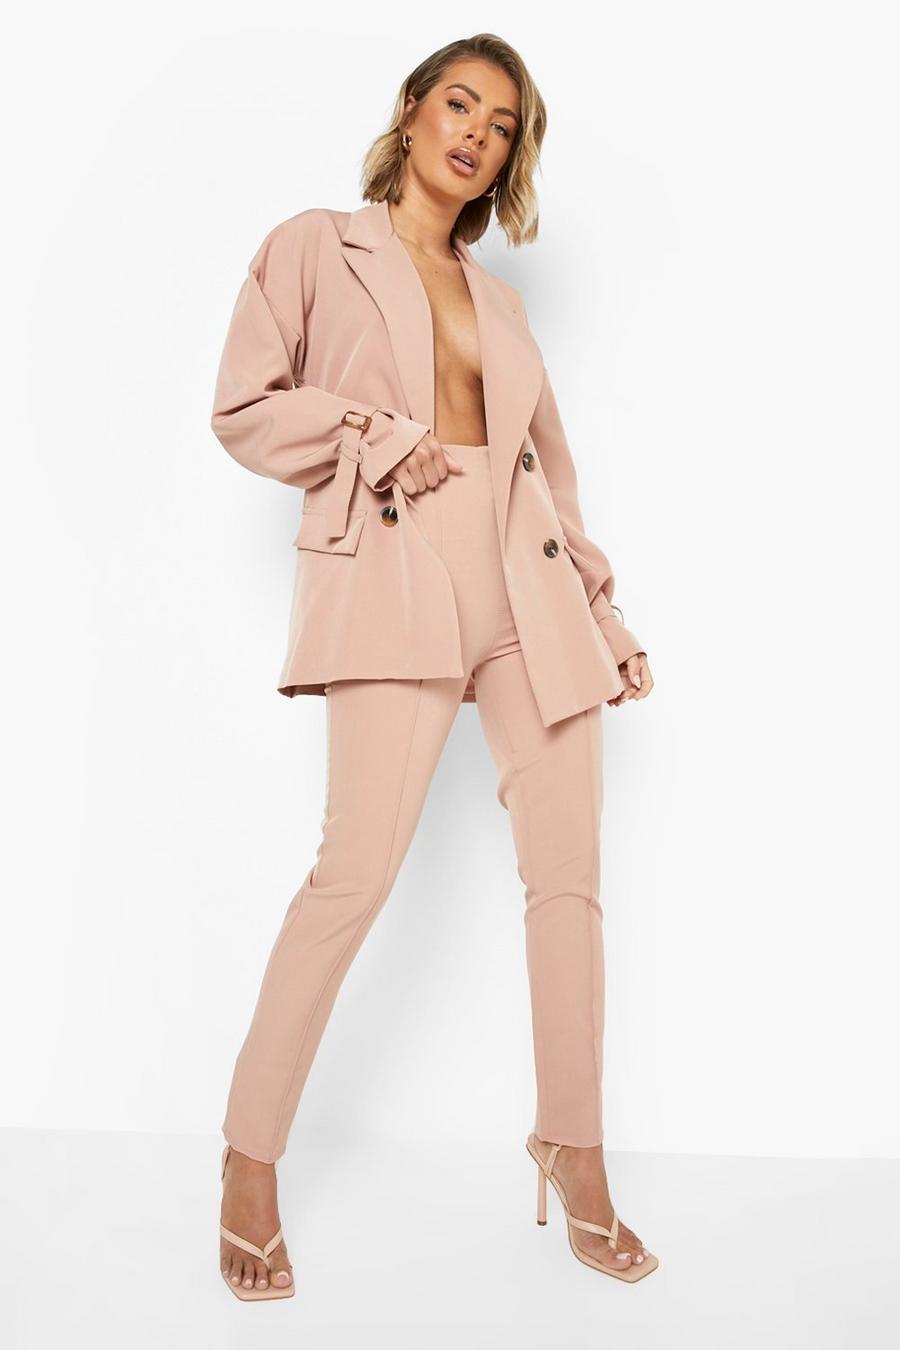 Nude Seam Front Ankle Grazer Tailored Pants